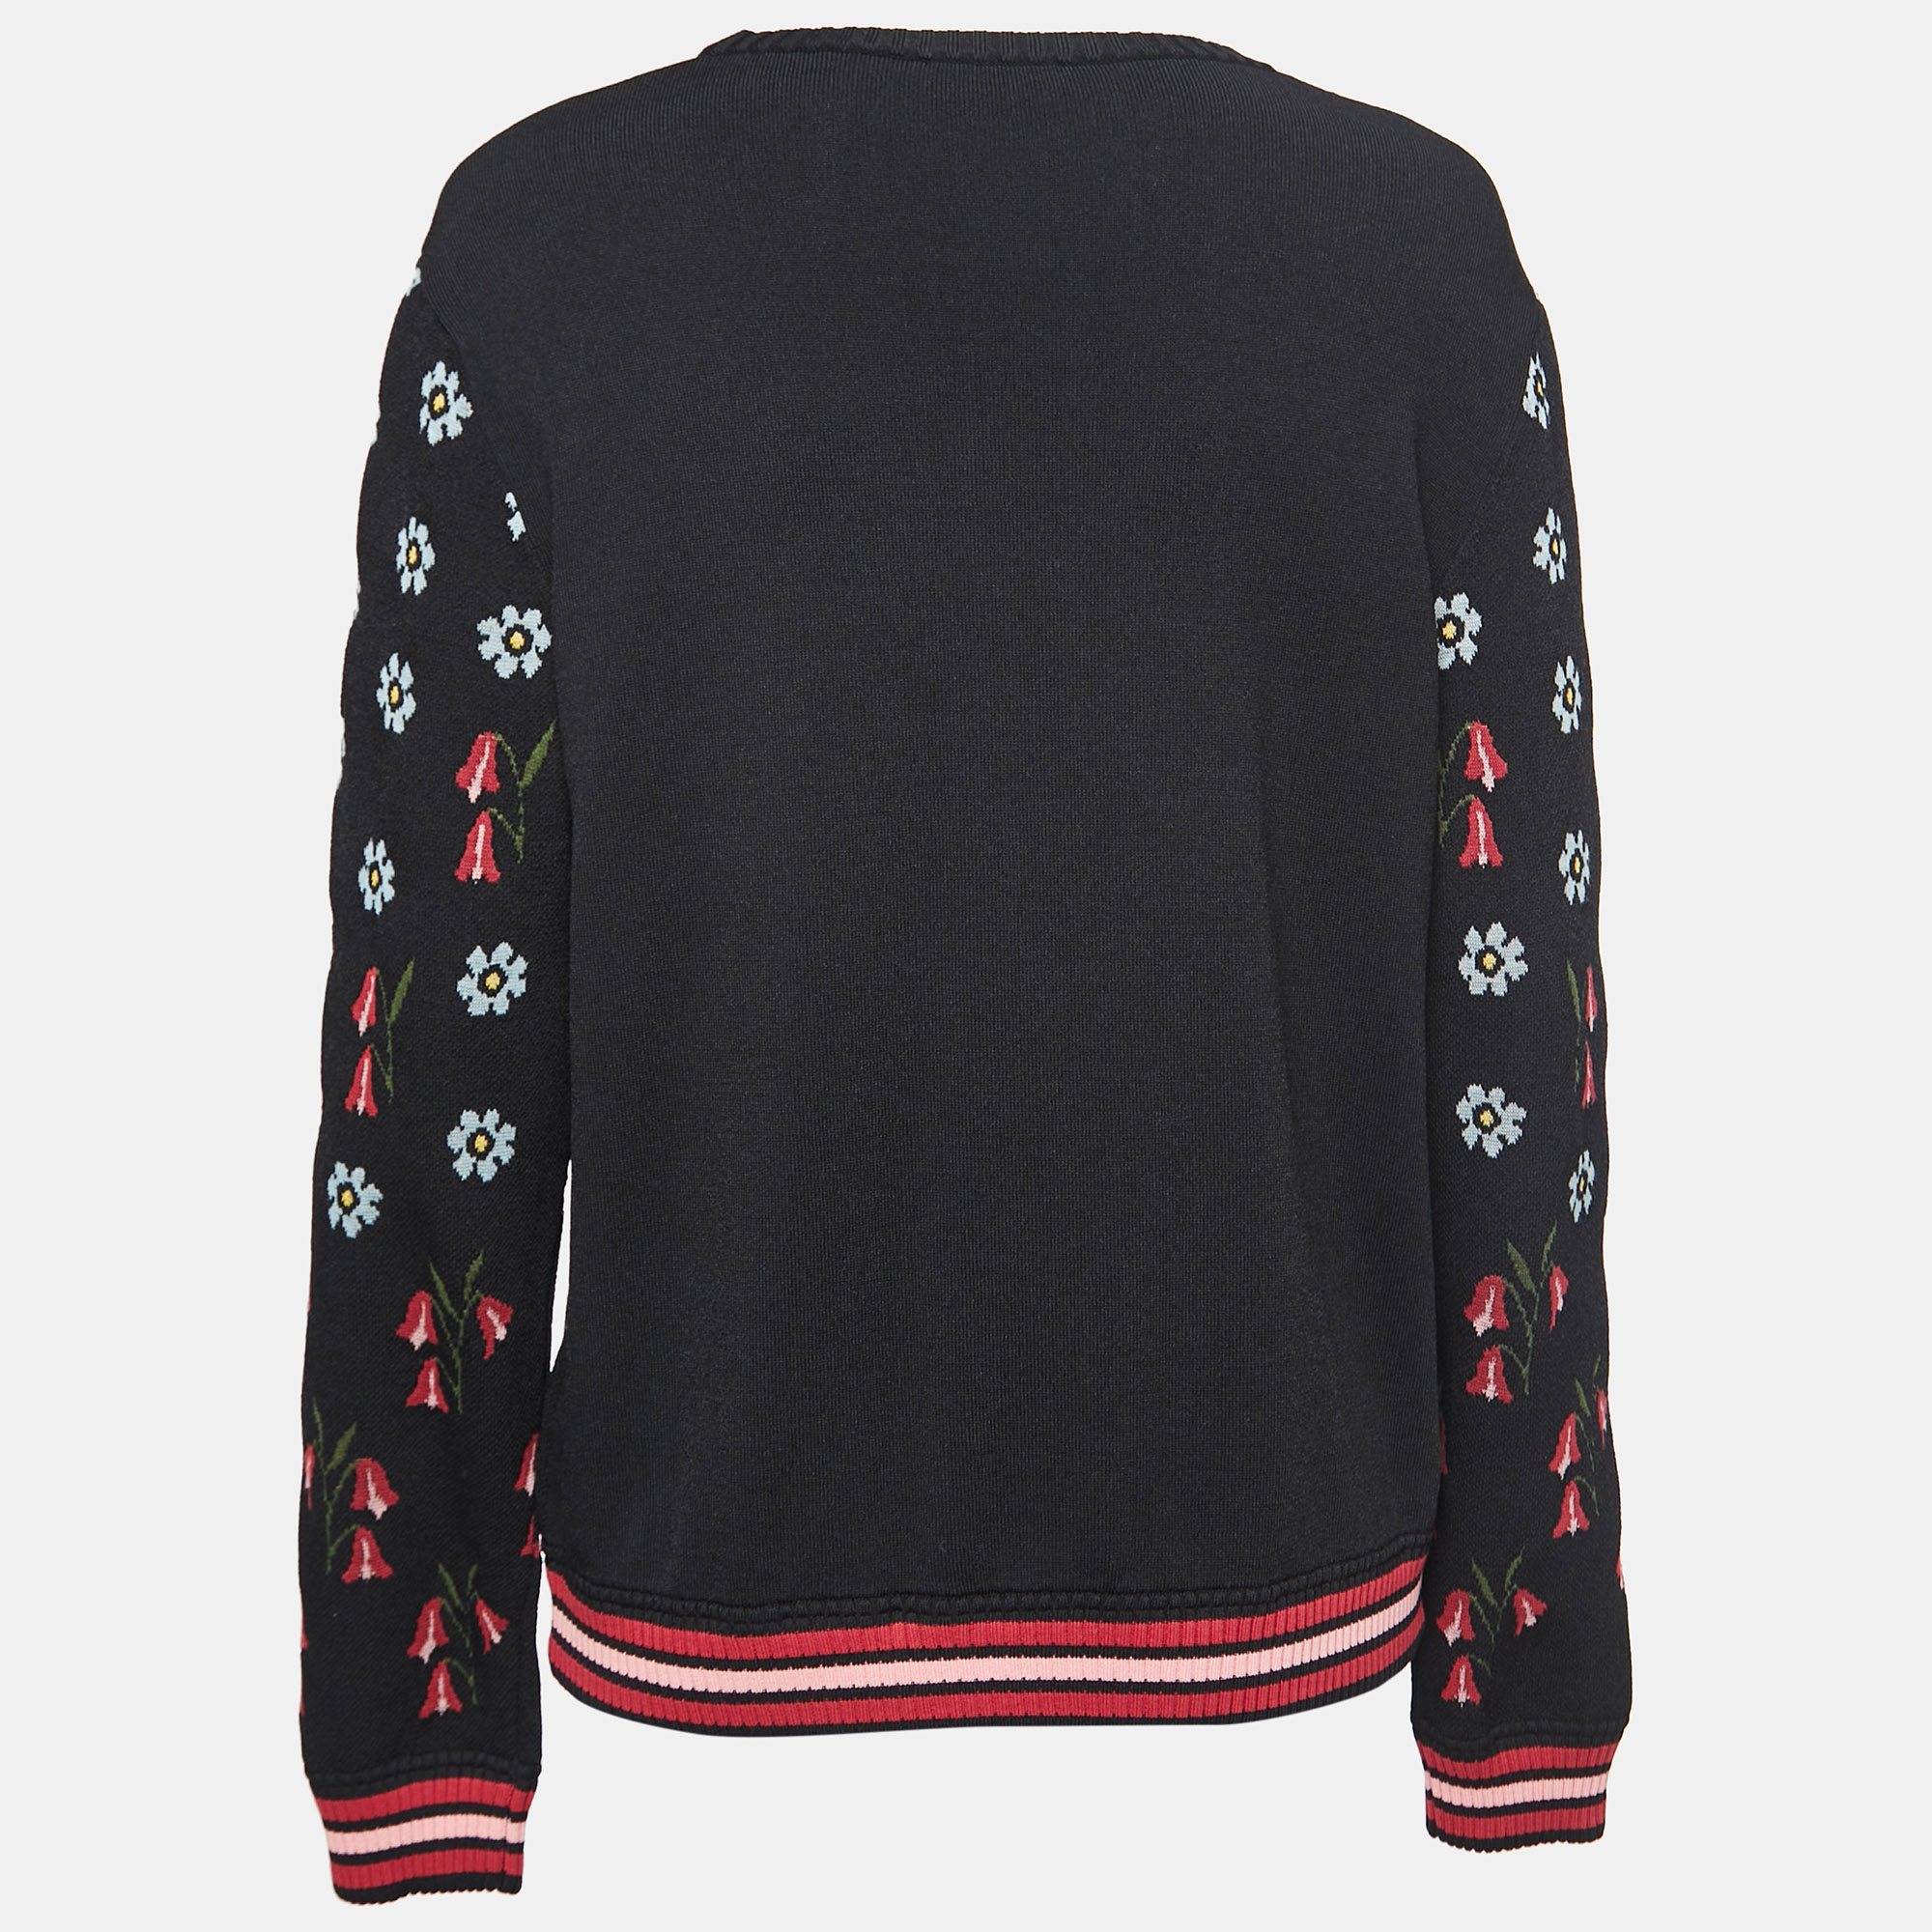 

RED Valentino Black Floral Patterned Knit Sweater